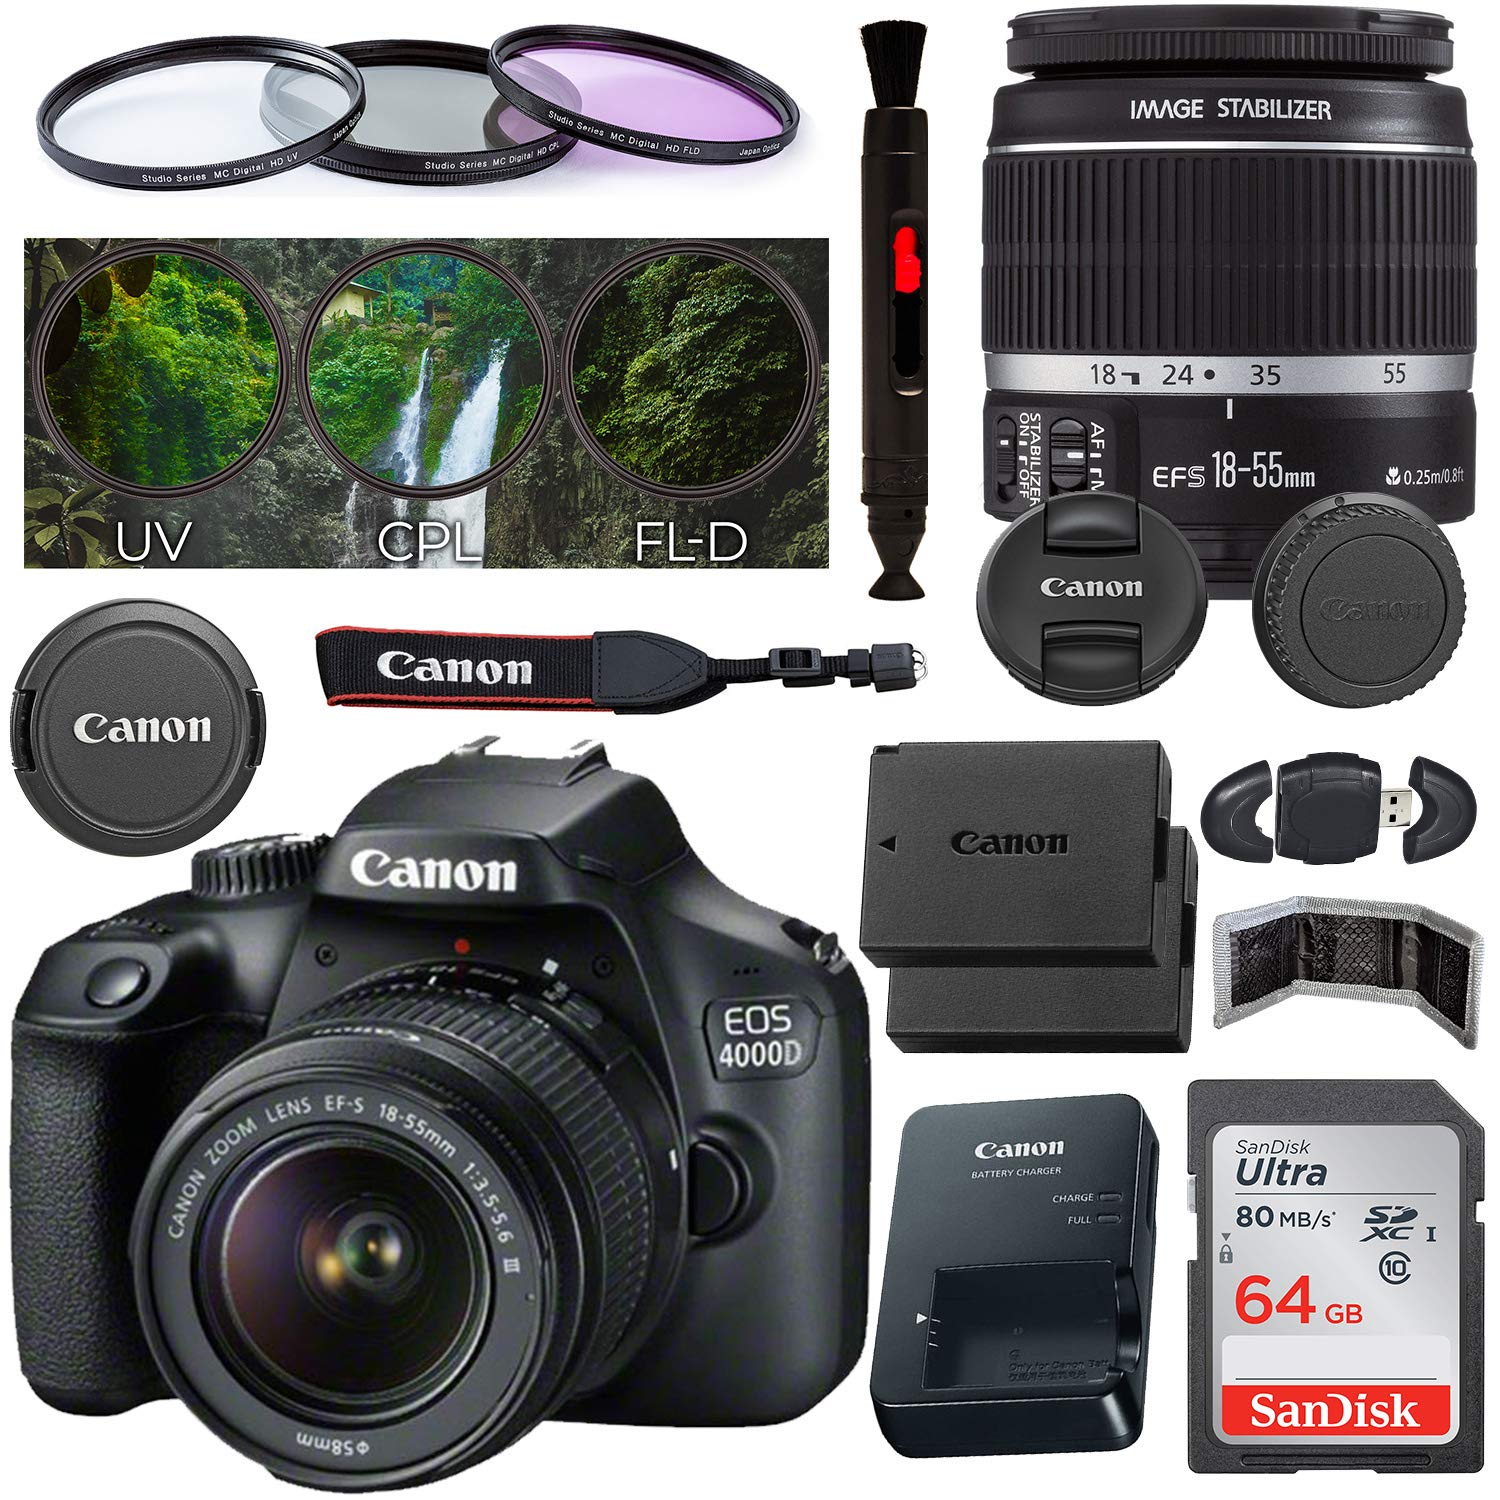 Canon EOS 4000D DSLR Camera with EF-S 18-55mm f/3.5-5.6 III Lens - 2628C003 with Premium Accessory Bundle